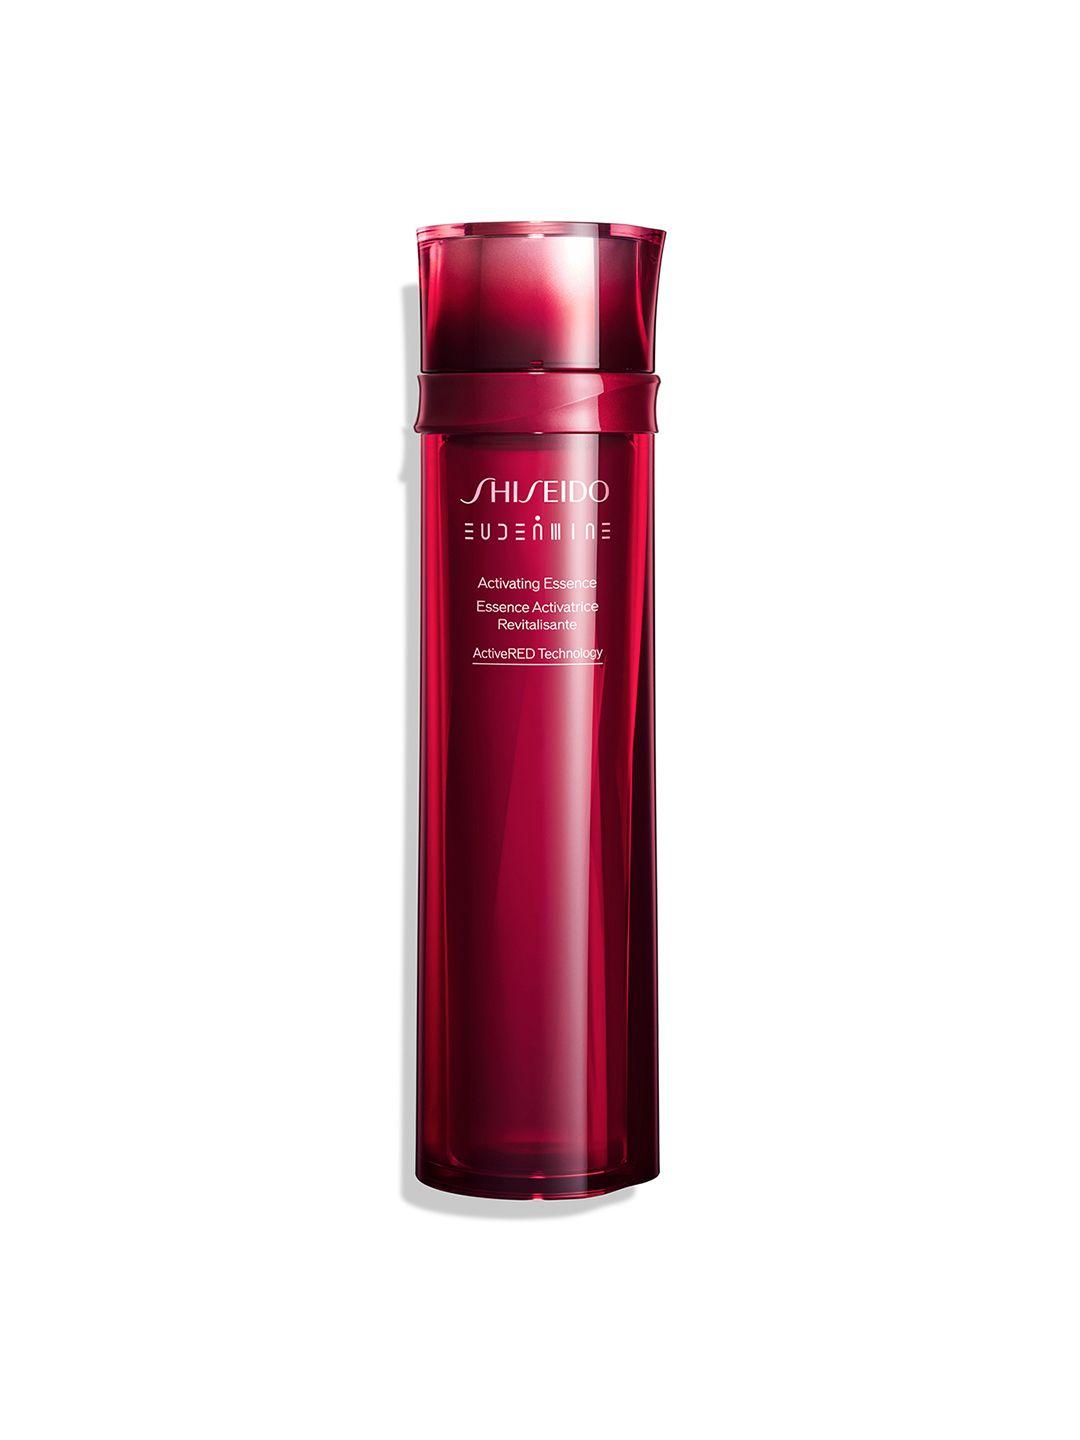 shiseido eudermine activating essence with active red technology - 145 ml